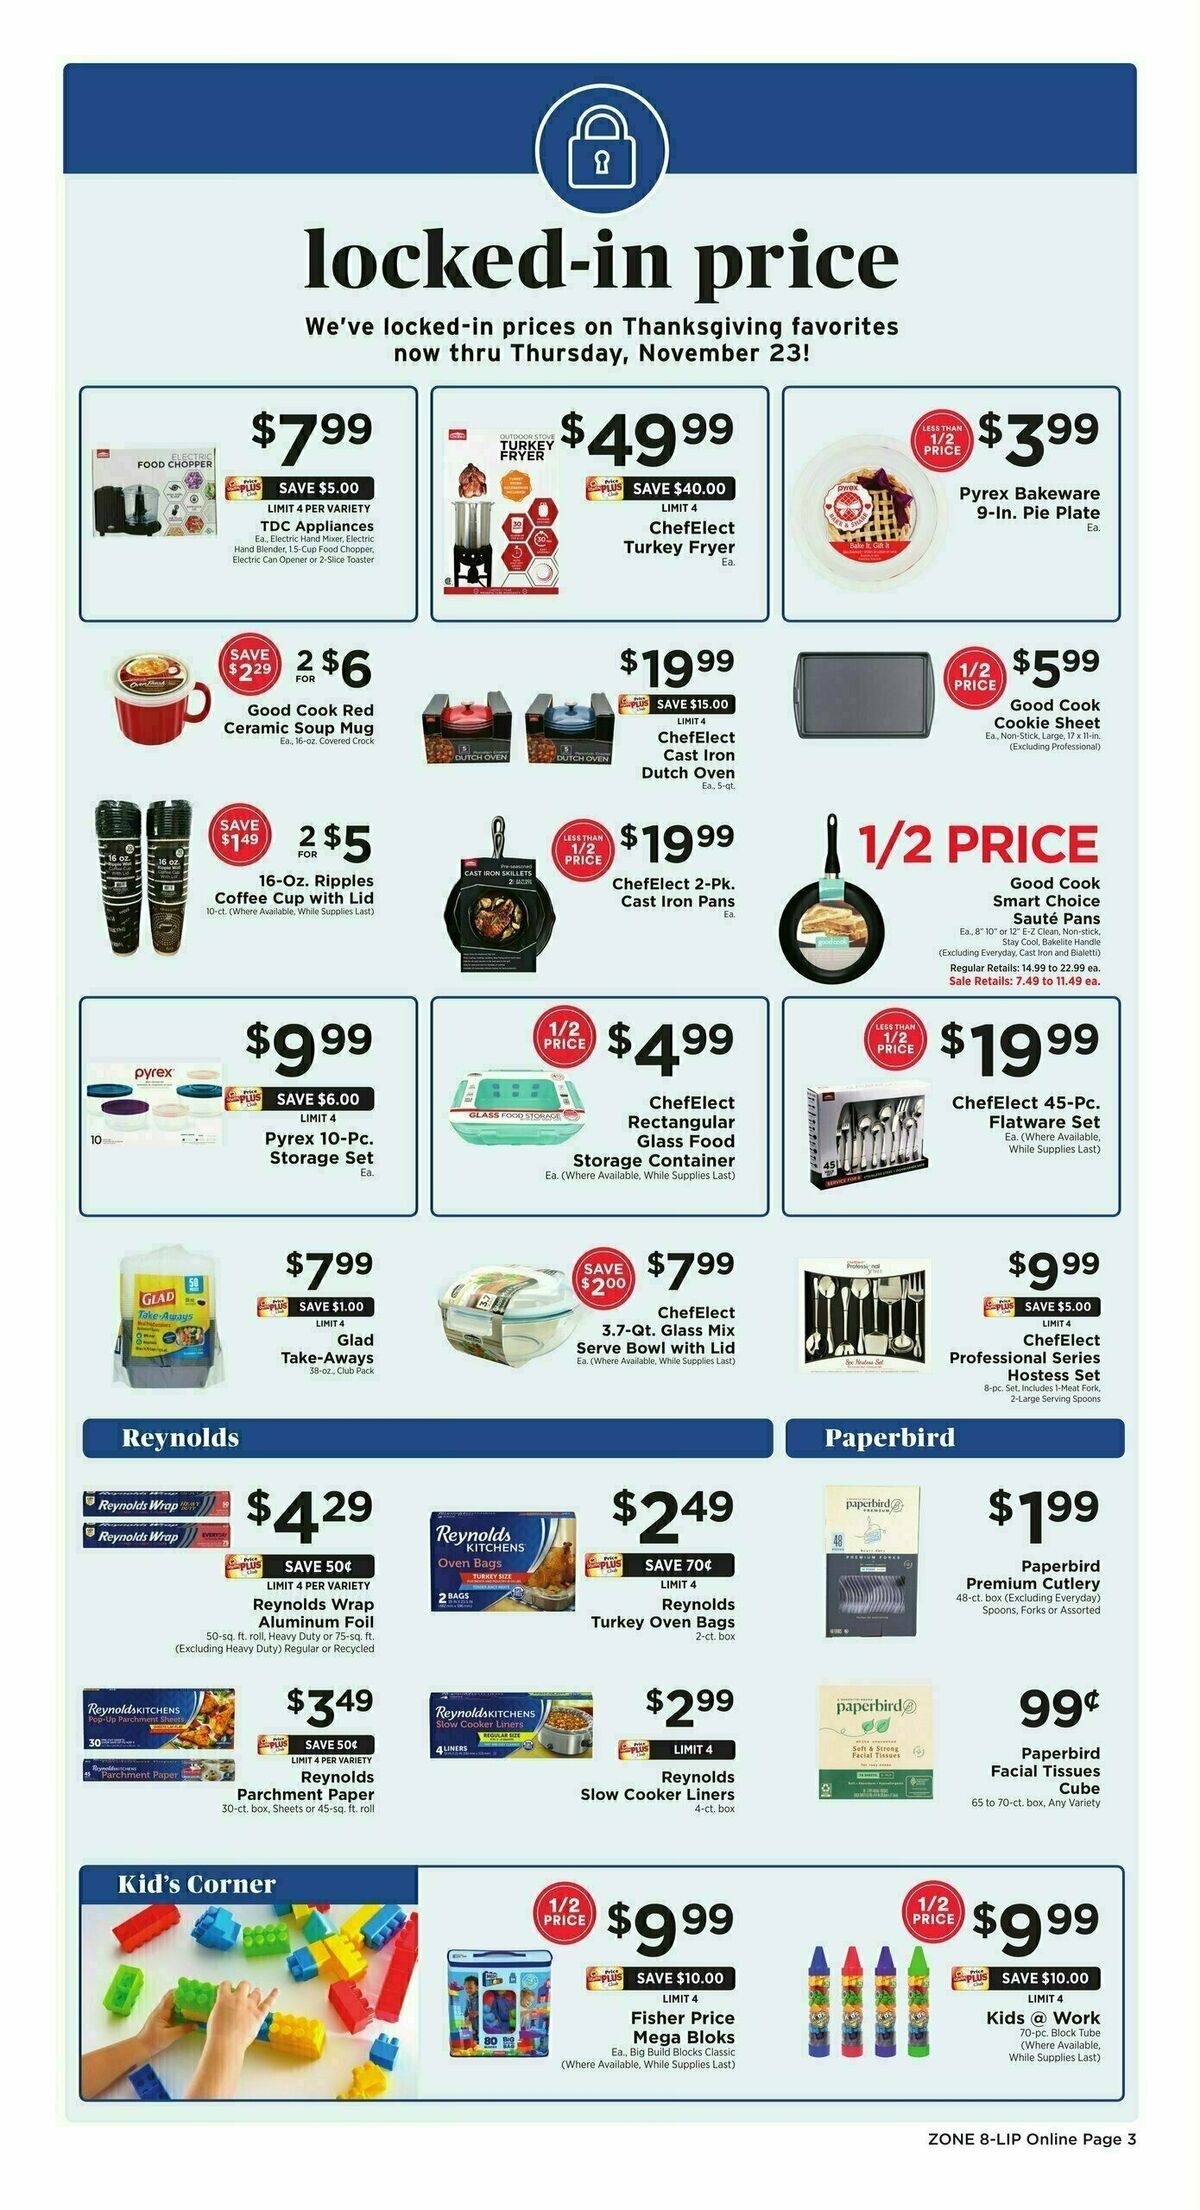 ShopRite Locked-in-Price Weekly Ad from October 27